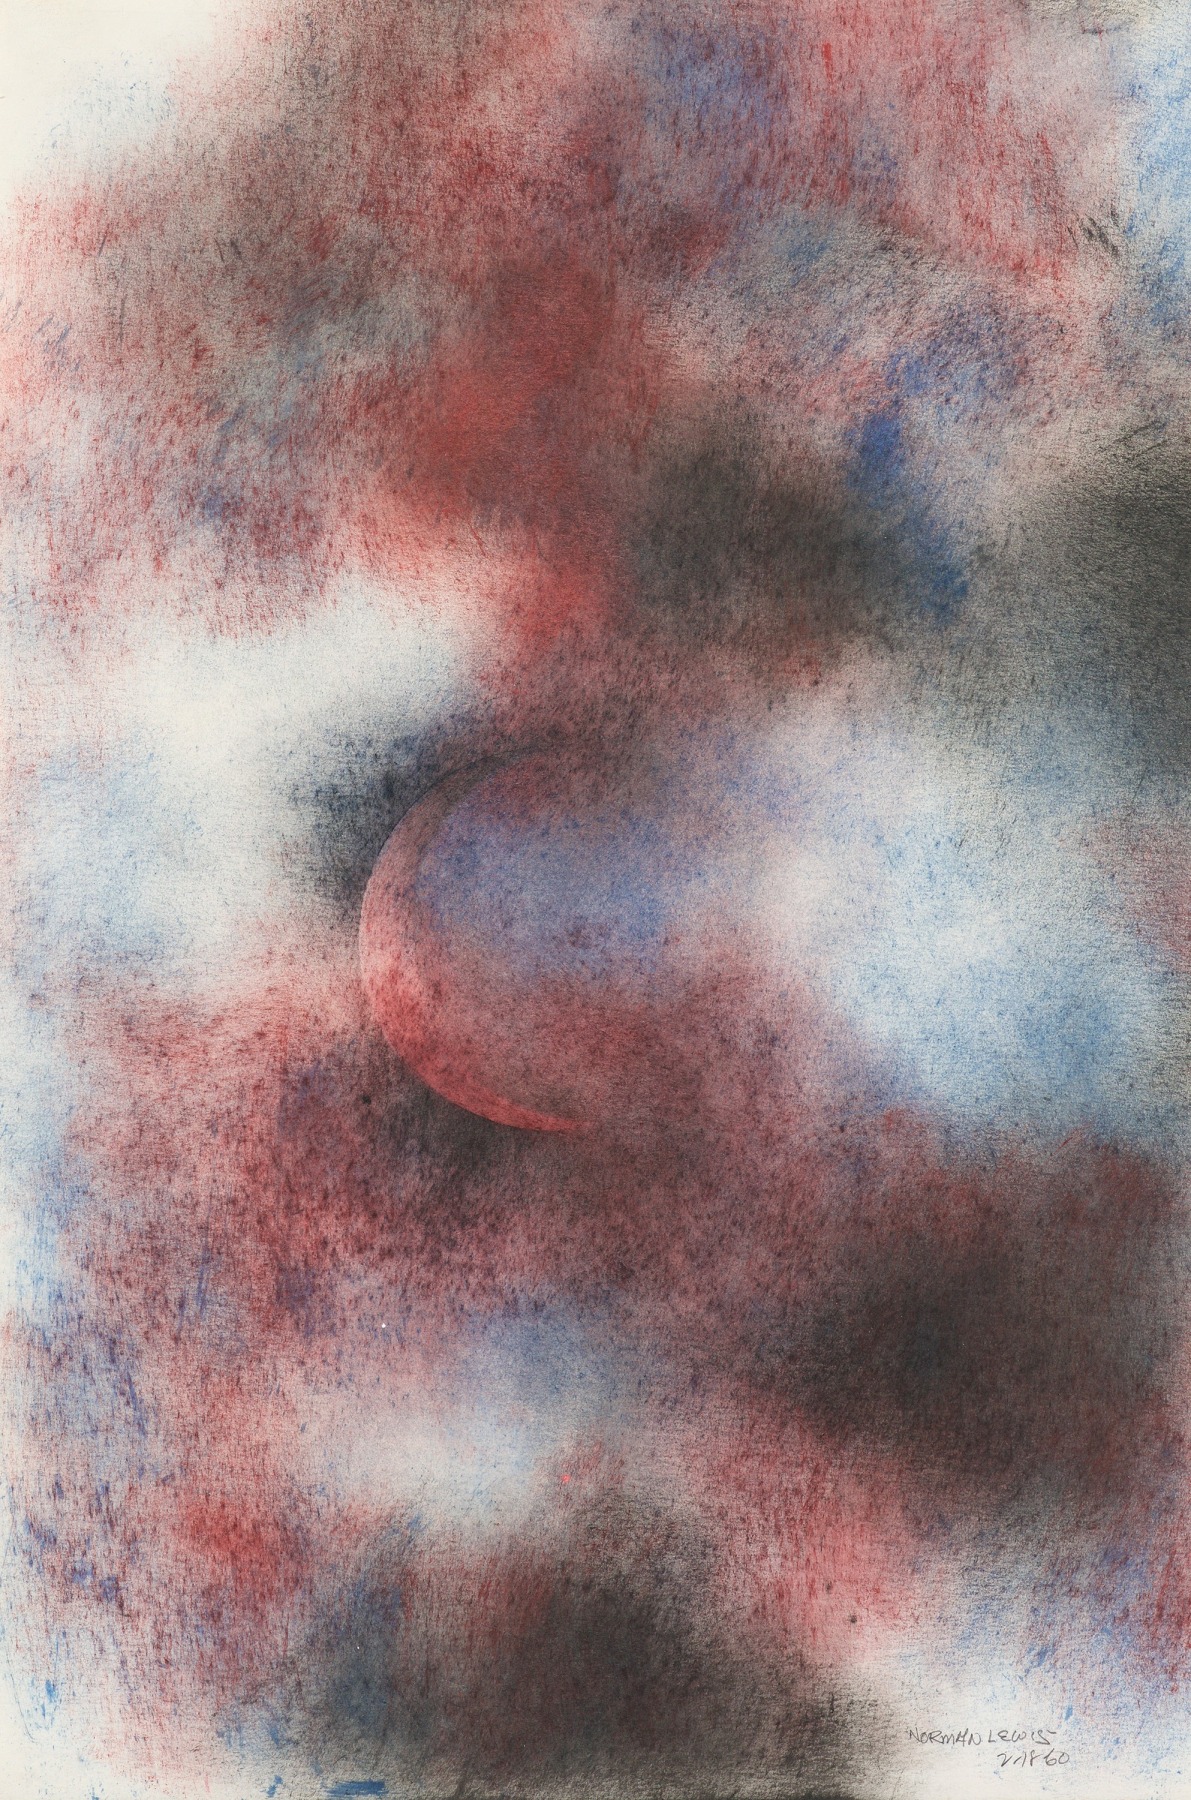 Norman Lewis Composition with Moon , 1960, Mixed Media on Paper, 23-1/4 x 27-1/2 inches, Signed and dated lower left 2-18-60, Abstract sky with crescent moon and black, blue and red cloud like marks, Norman Lewis was a vital member of the first generation of abstract expressionists. He was the sole African American artist of his generation and his art derived from his interests in music and equality issues.